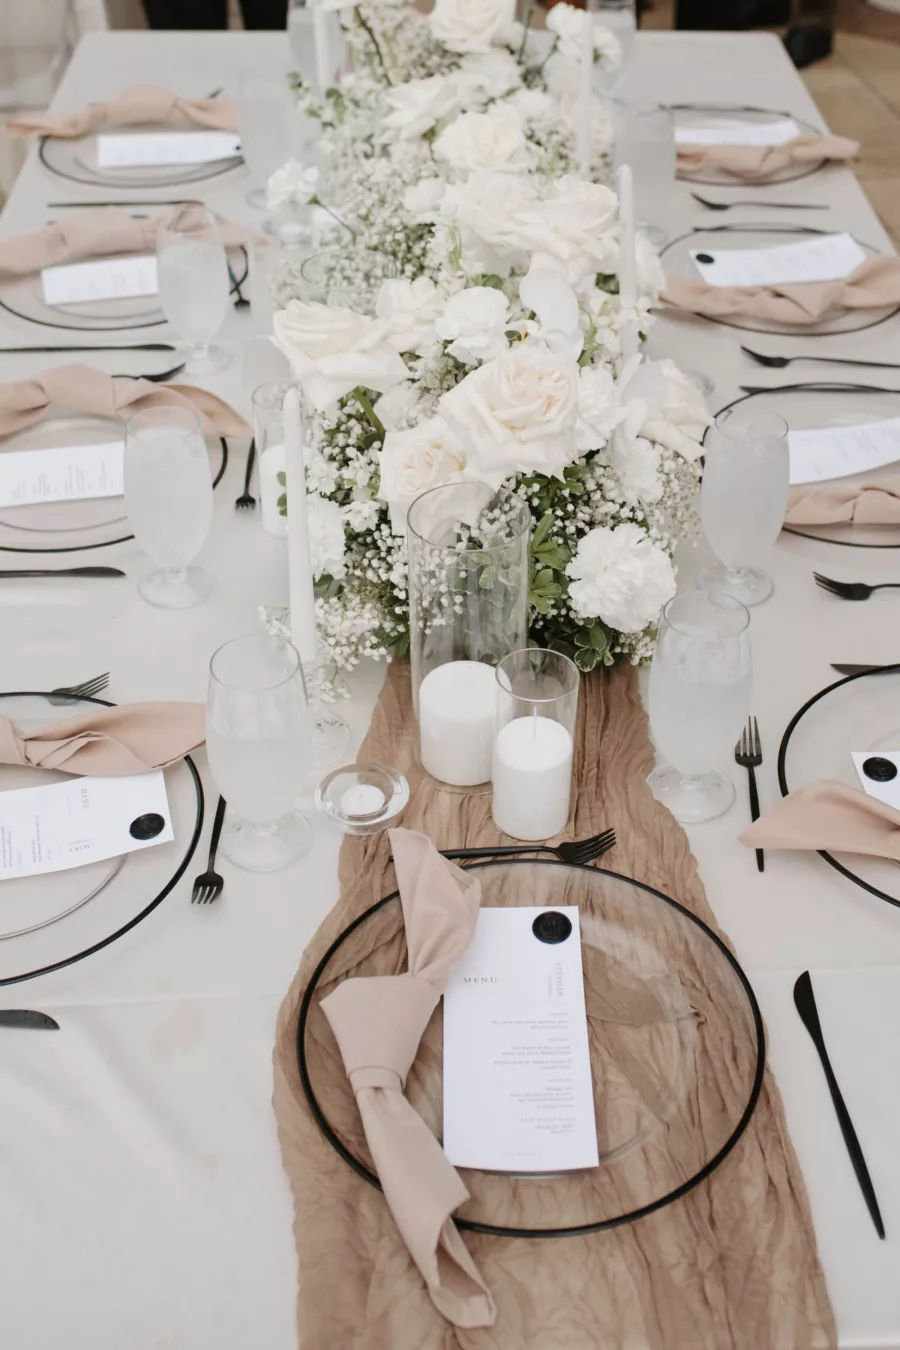 Timeless Spring Wedding Reception Tablescape Ideas | White Hydrangea, Orchid, and Rose Centerpiece Decor | Champagne Napkin Linens, Black-Rimmed Chargers, Black Flatware Place Setting Inspiration